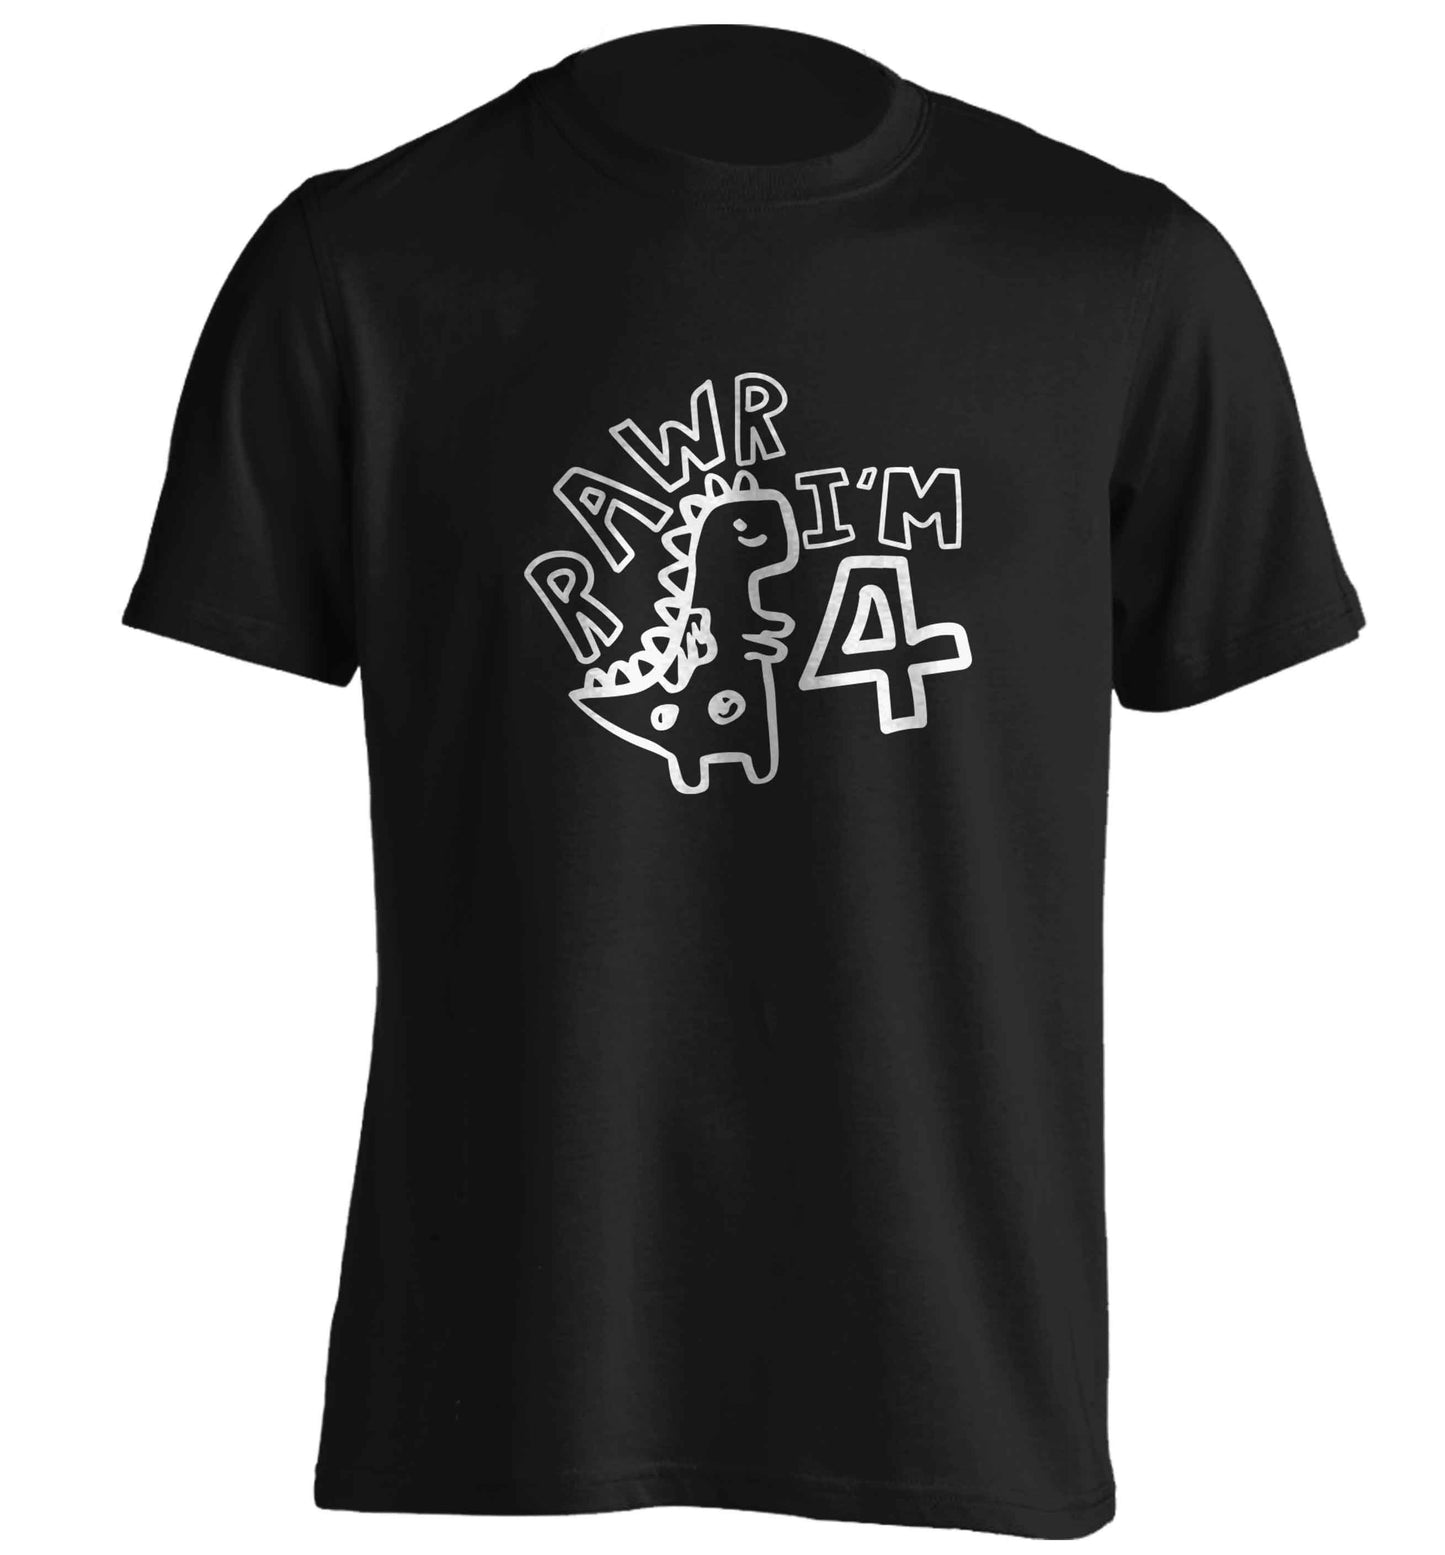 Rawr I'm four - personalise with ANY age! adults unisex black Tshirt 2XL